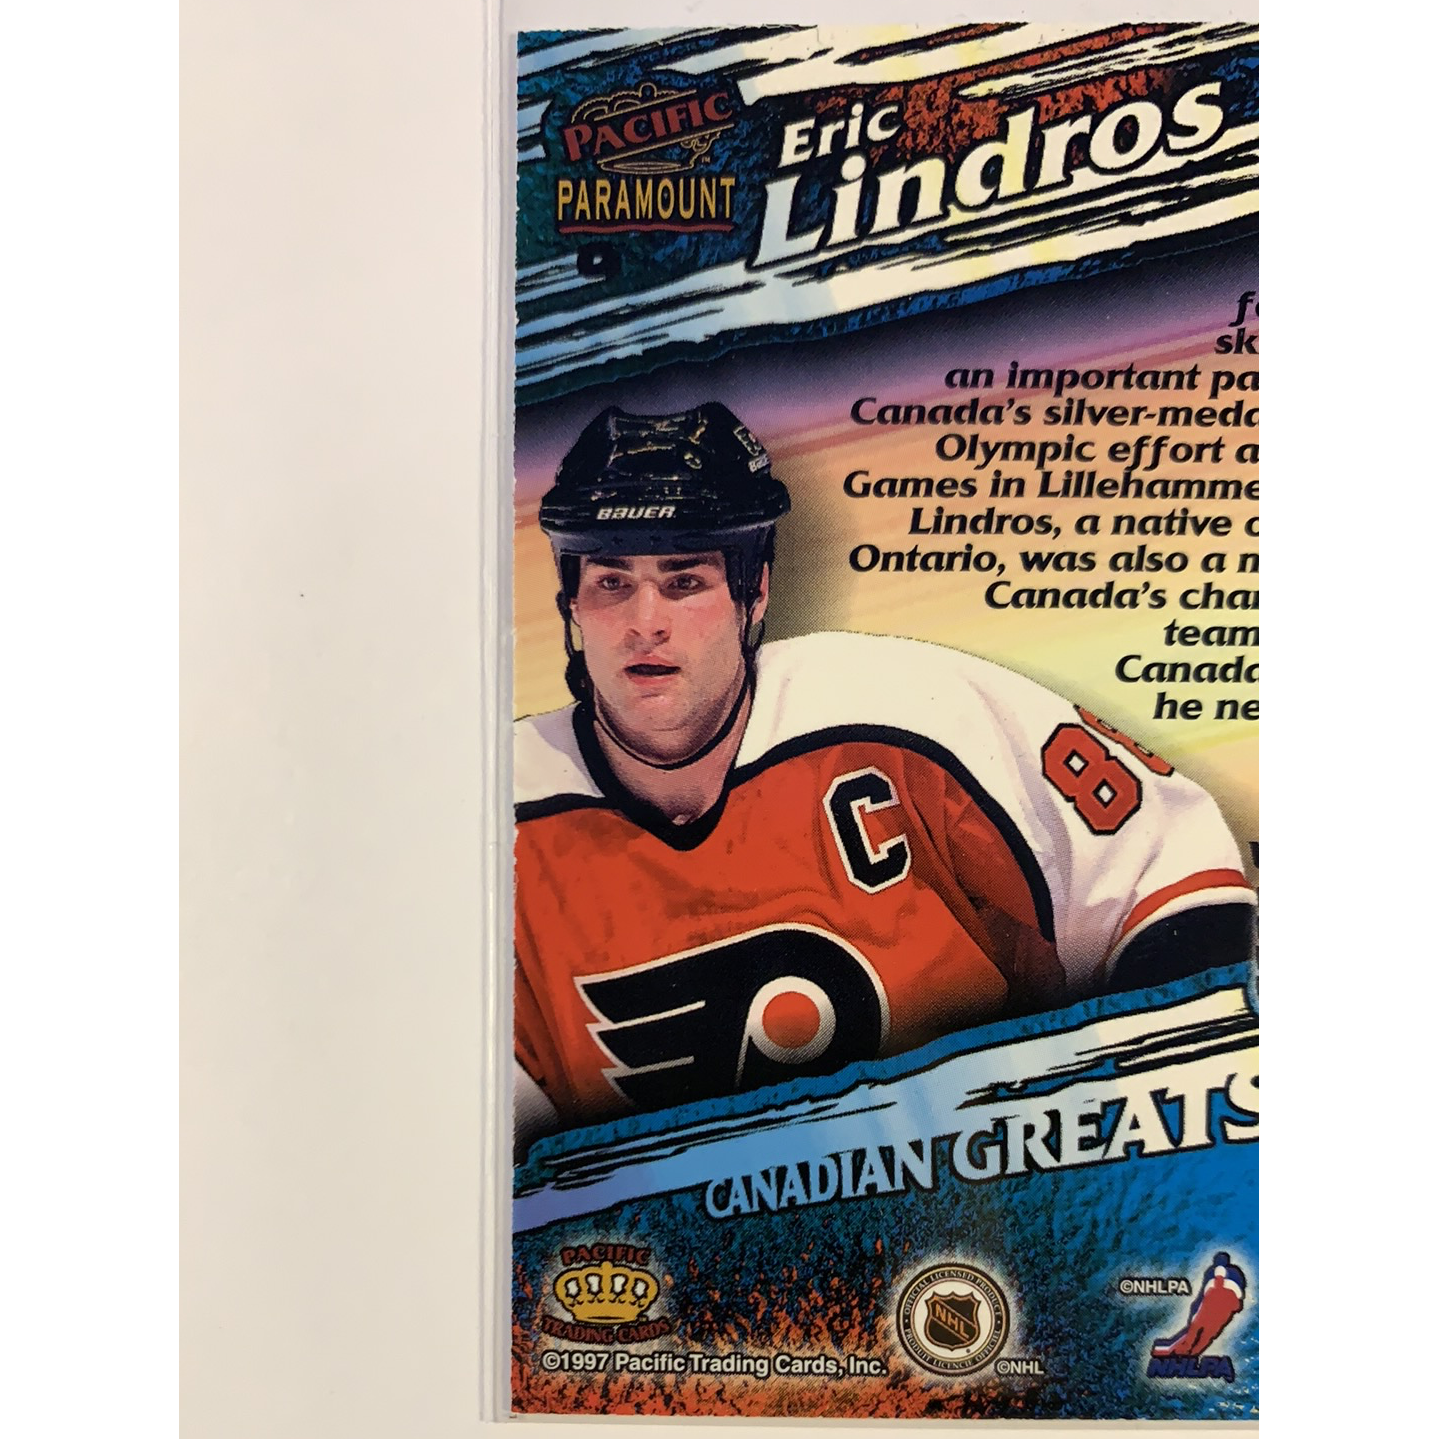  1997 Pacific Eric Lindros Canadian Greats  Local Legends Cards & Collectibles